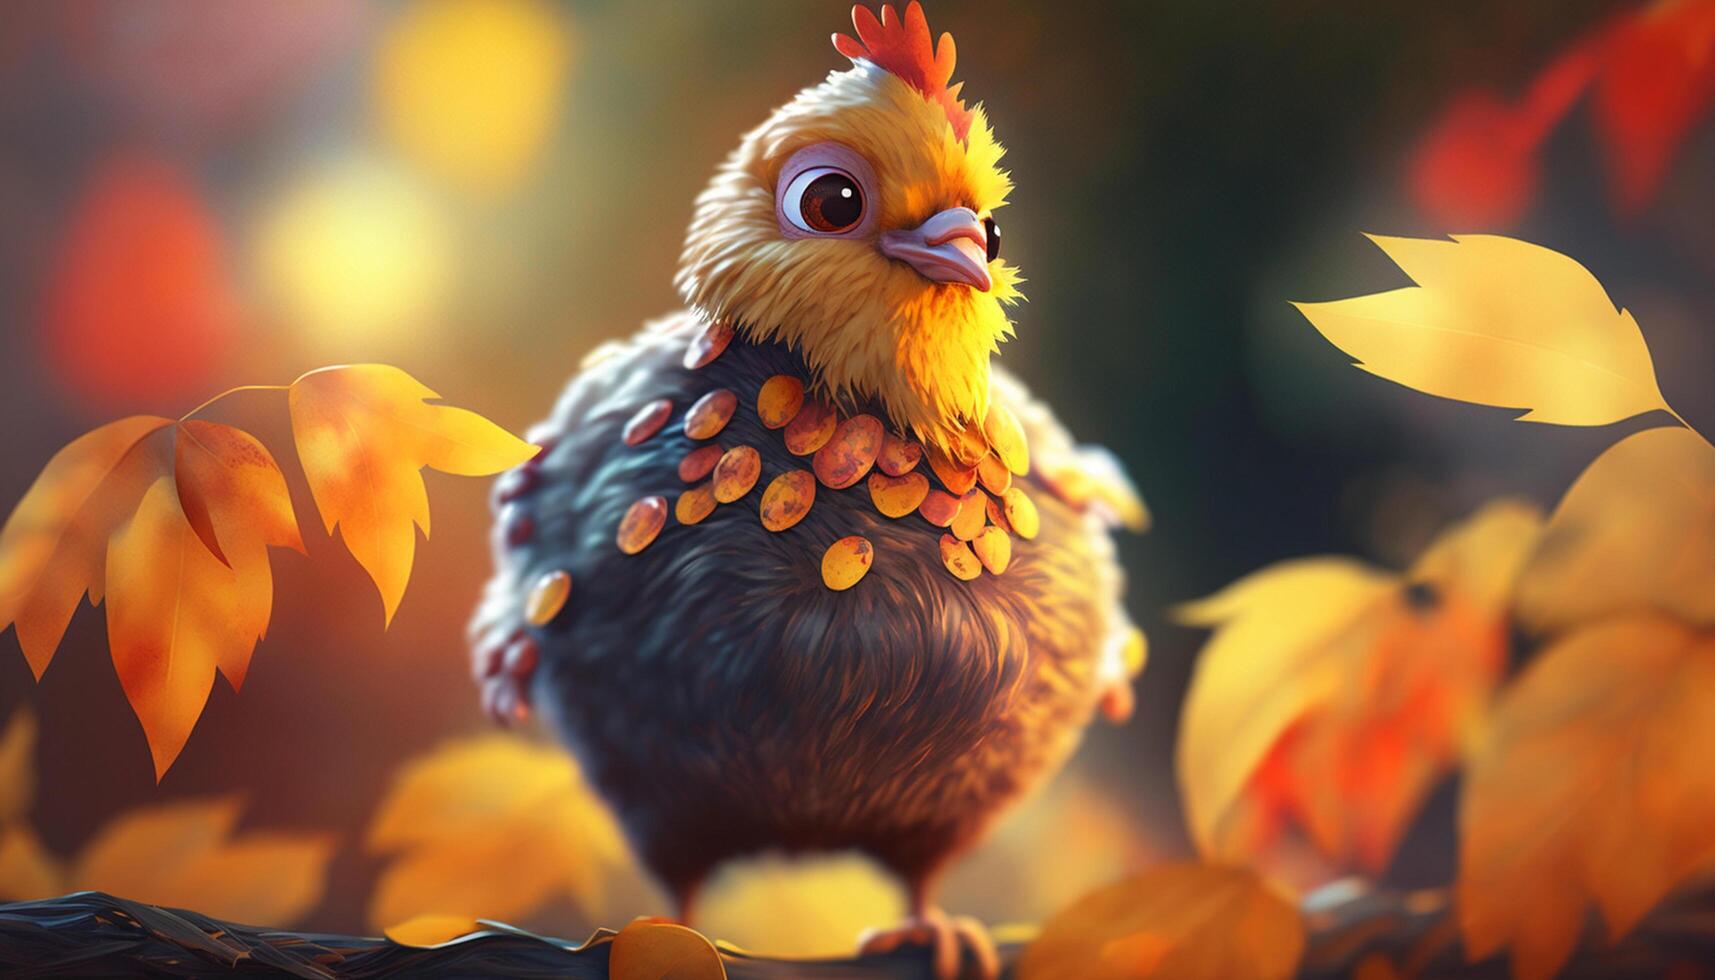 Autumn Leaves and Cute Little Chicken A Perfect Fall Day photo